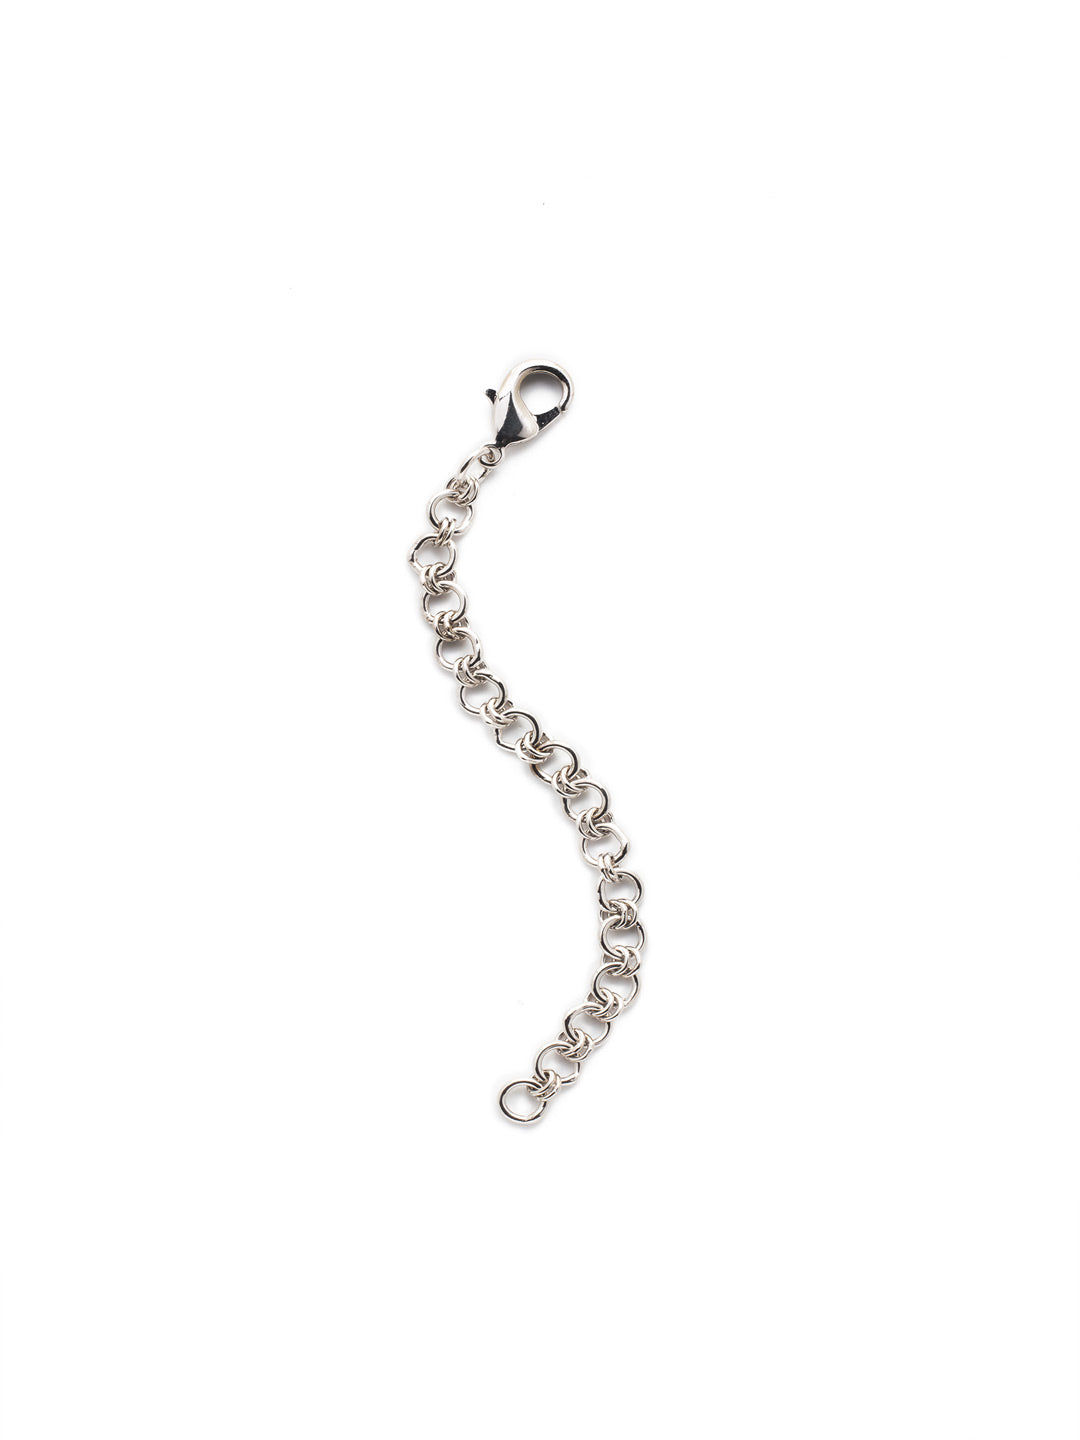 Buy Sterling Silver Chain Length Extender for Necklace or Bracelet, 1 Inch,  1.5, 2 Inch, 3, 4 or 5 Inch Extension Lengthener Adjuster Resizer Online in  India - Etsy